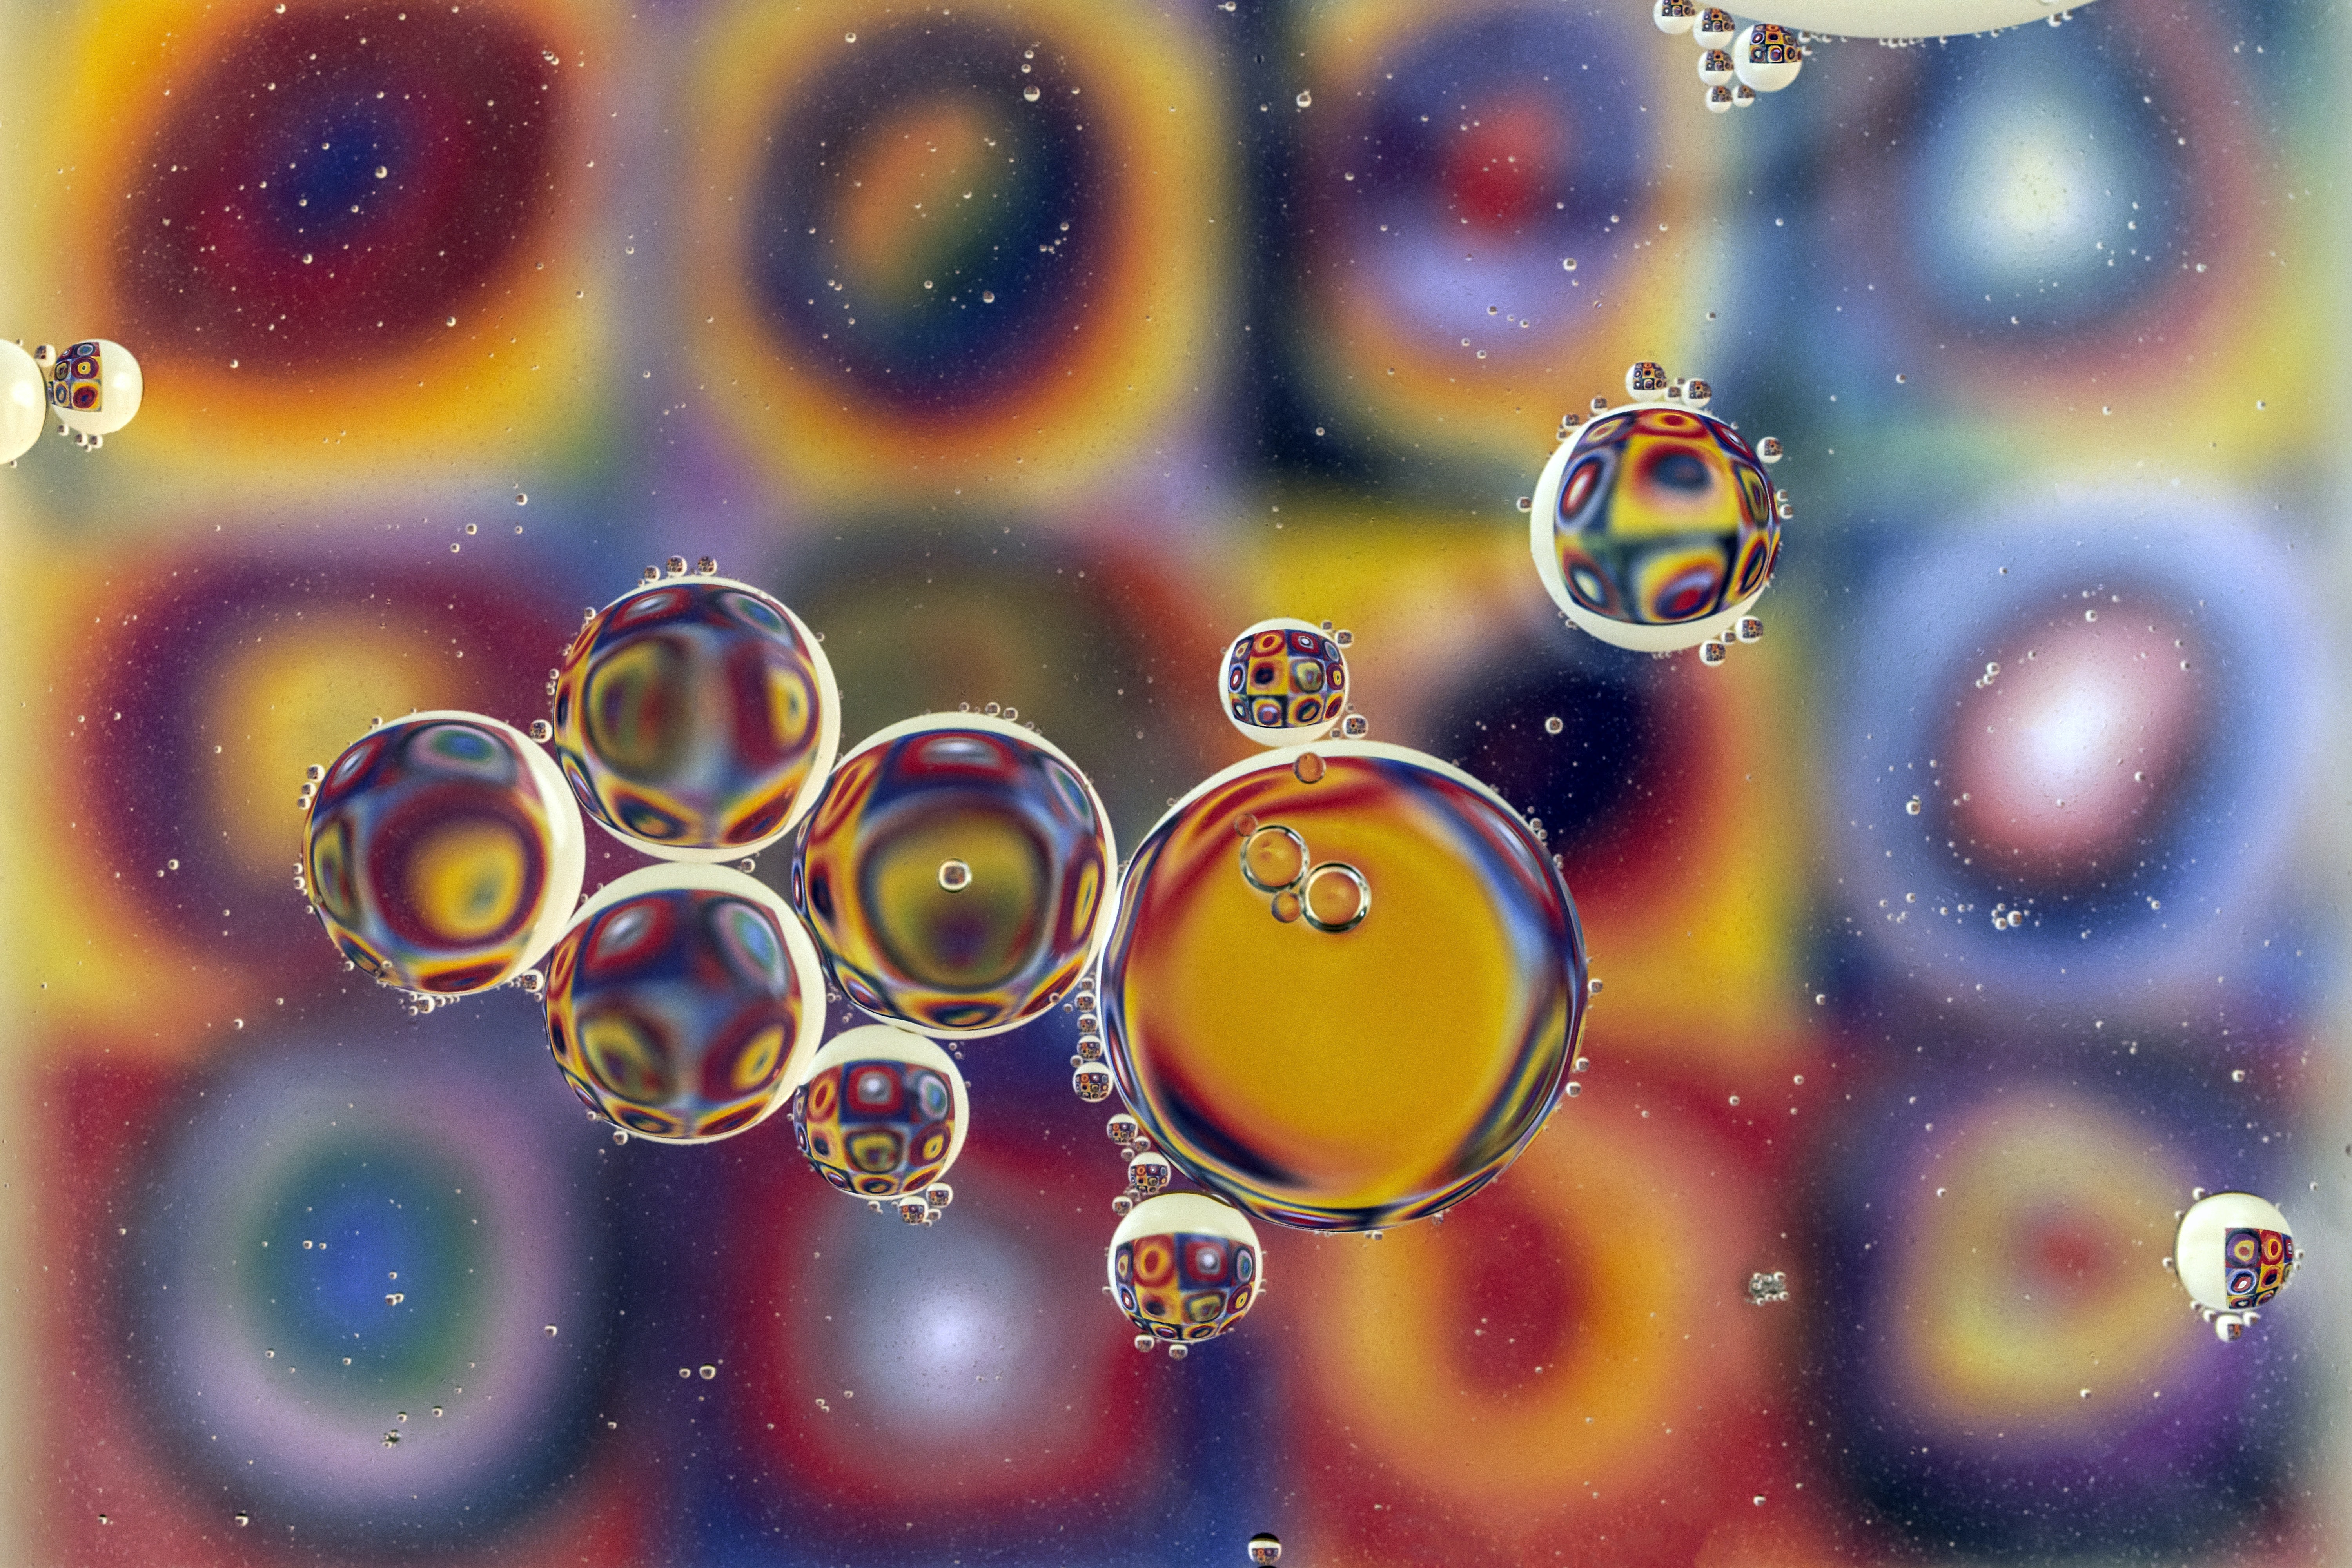 Windows Backgrounds motley, abstract, multicolored, water, bubbles, blur, smooth